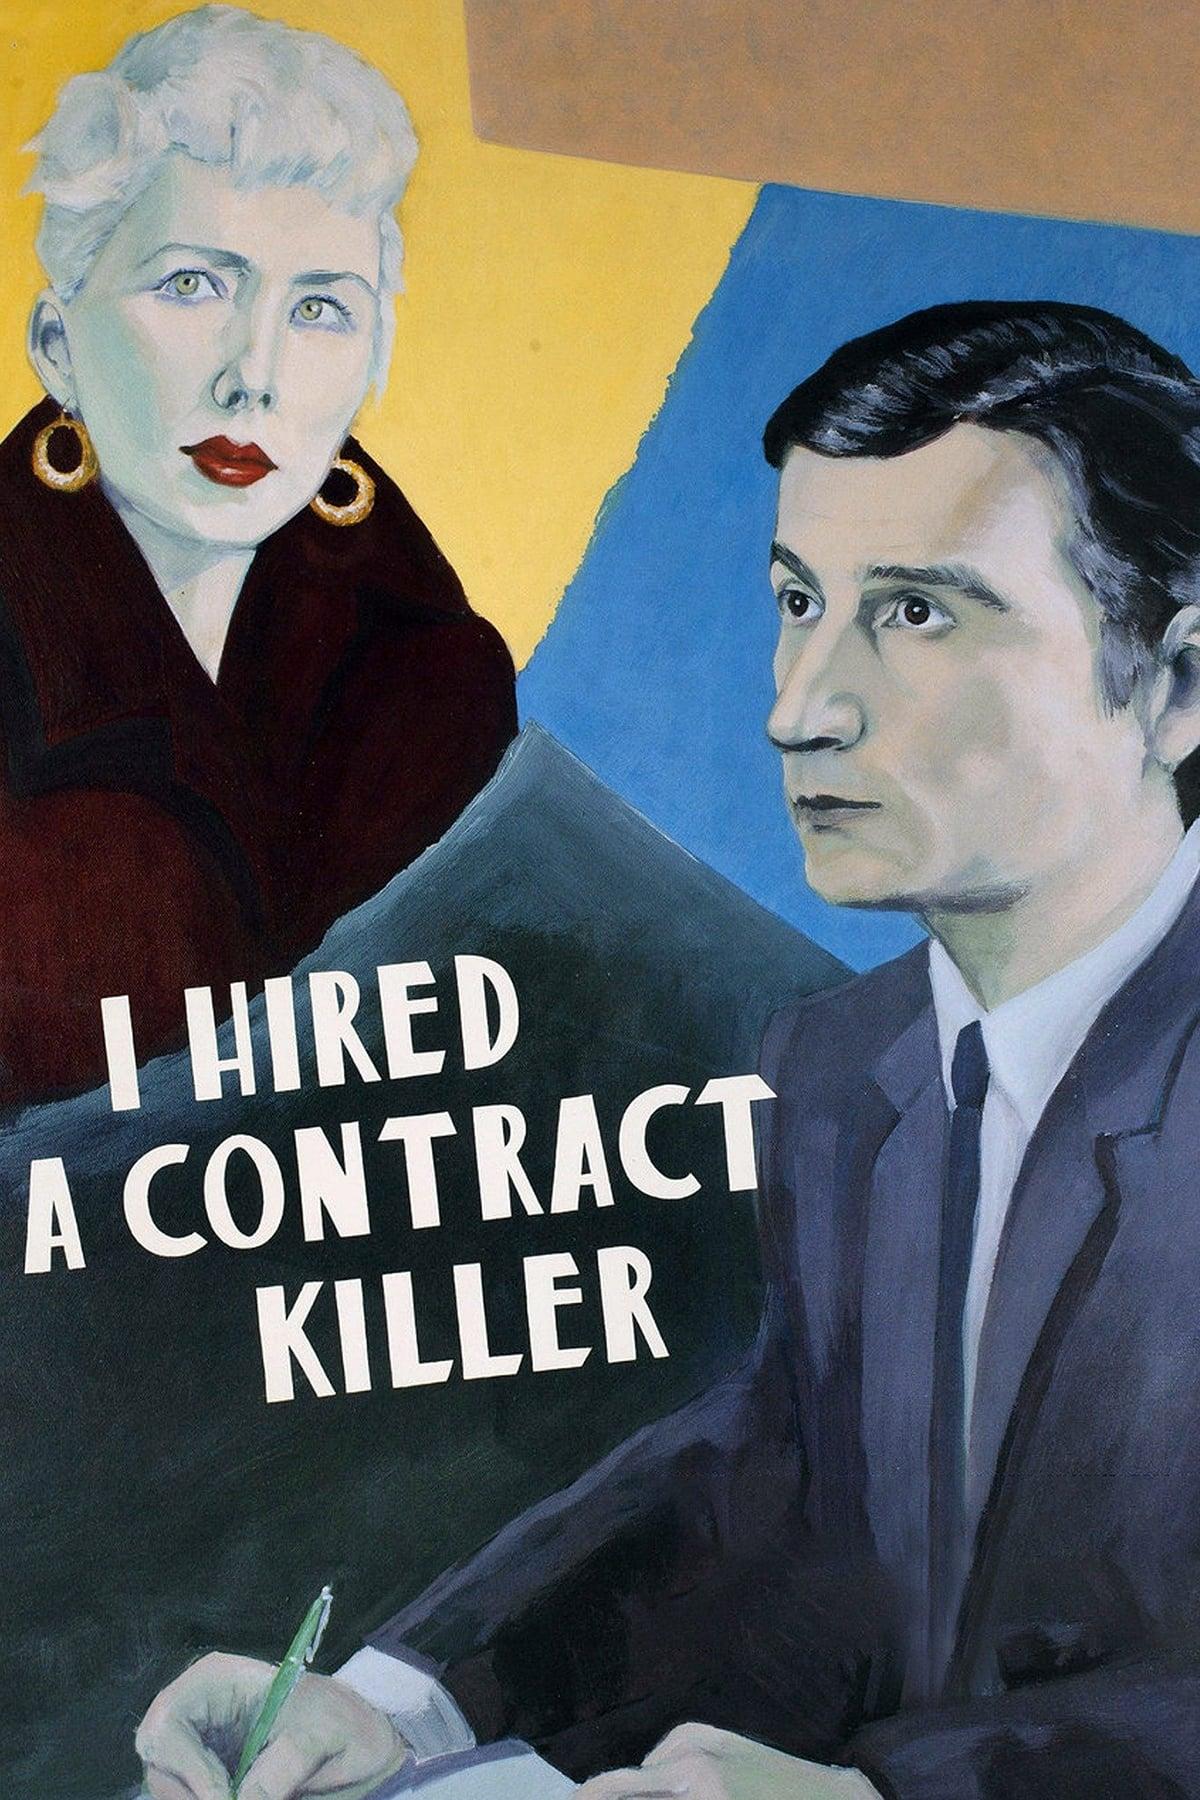 I Hired a Contract Killer poster